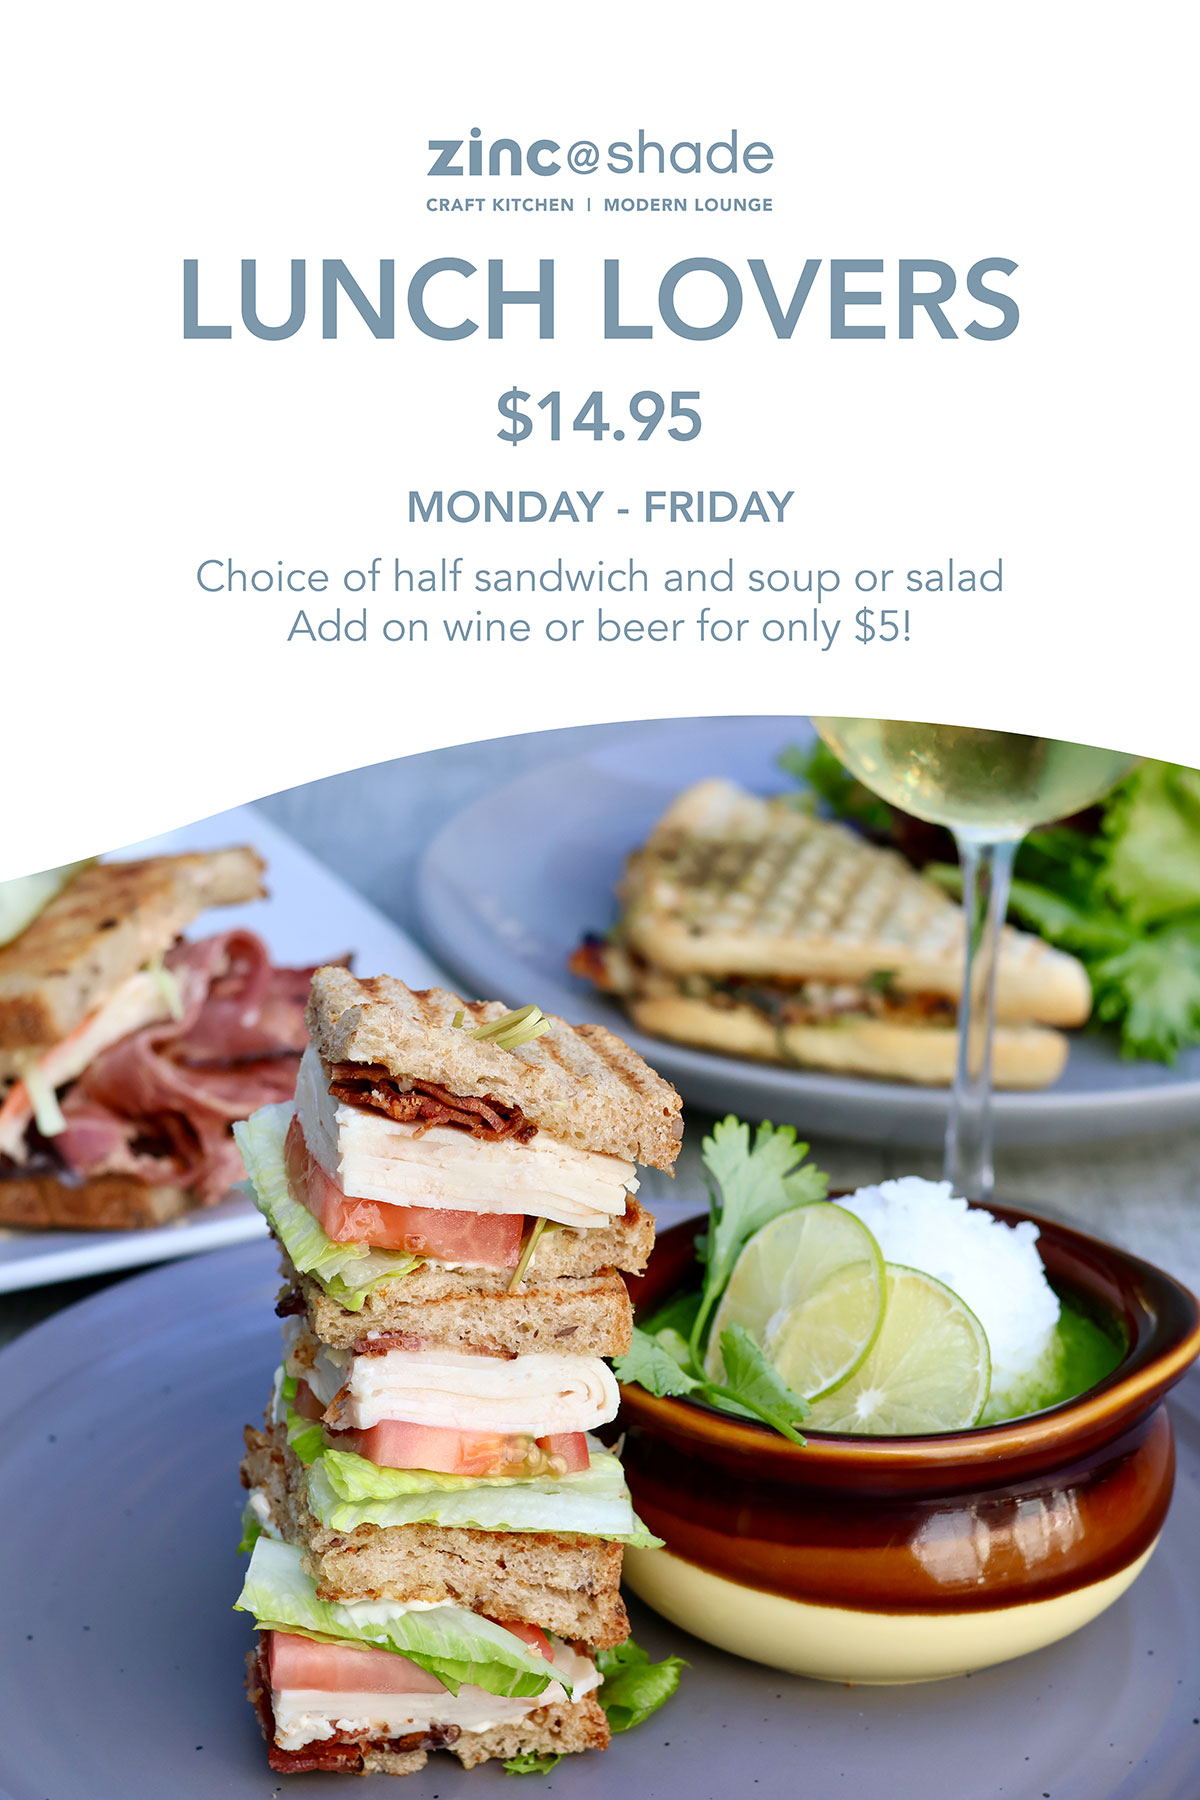 Lunch Lovers promotional poster